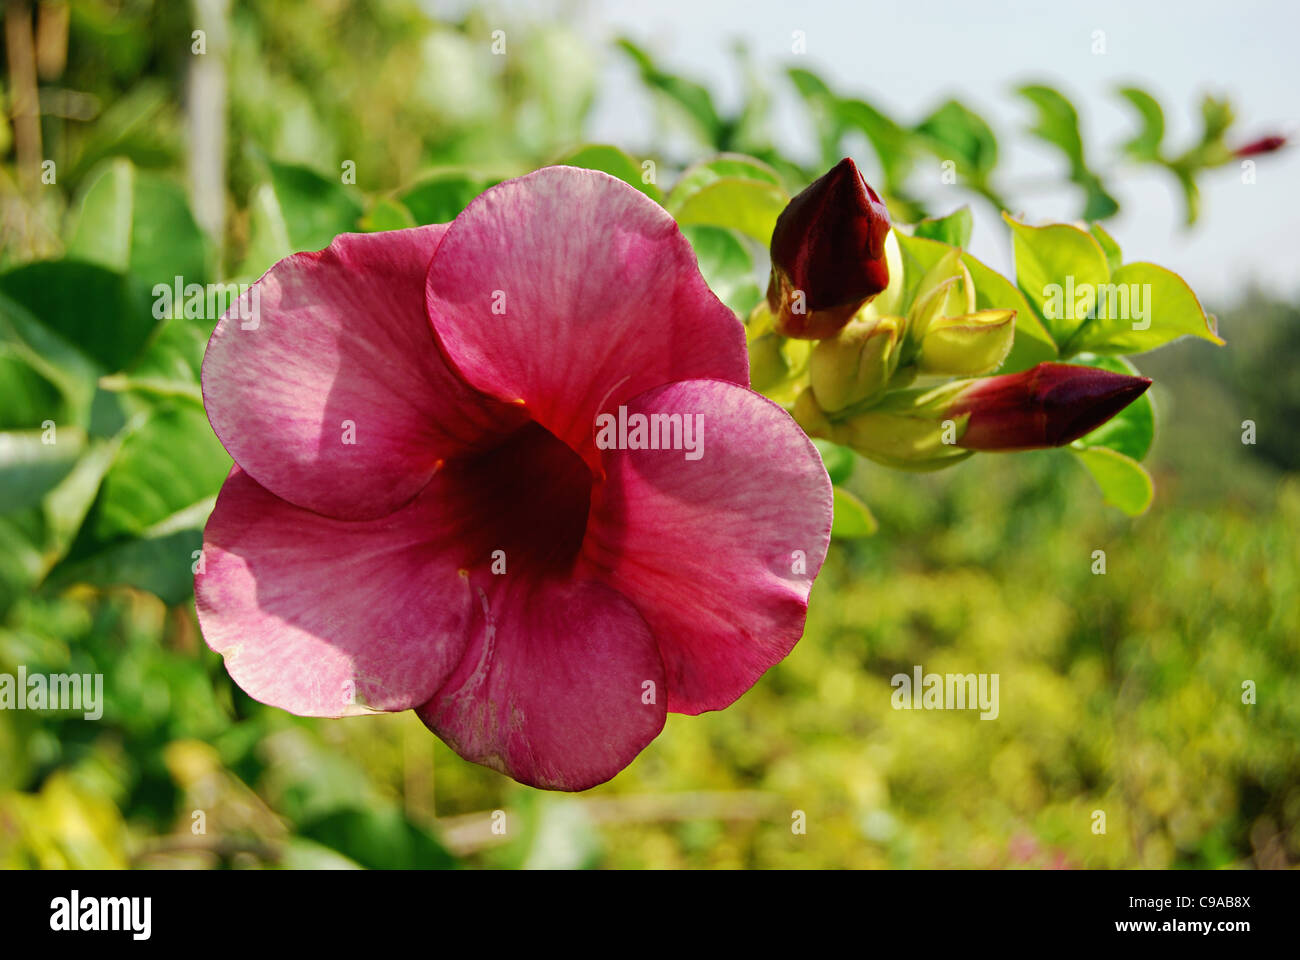 Purple Allamanda Flower. Allamanda is a member of the dogbane (Apocynaceae) family and includes 12 species of evergreen shrubs. Stock Photo